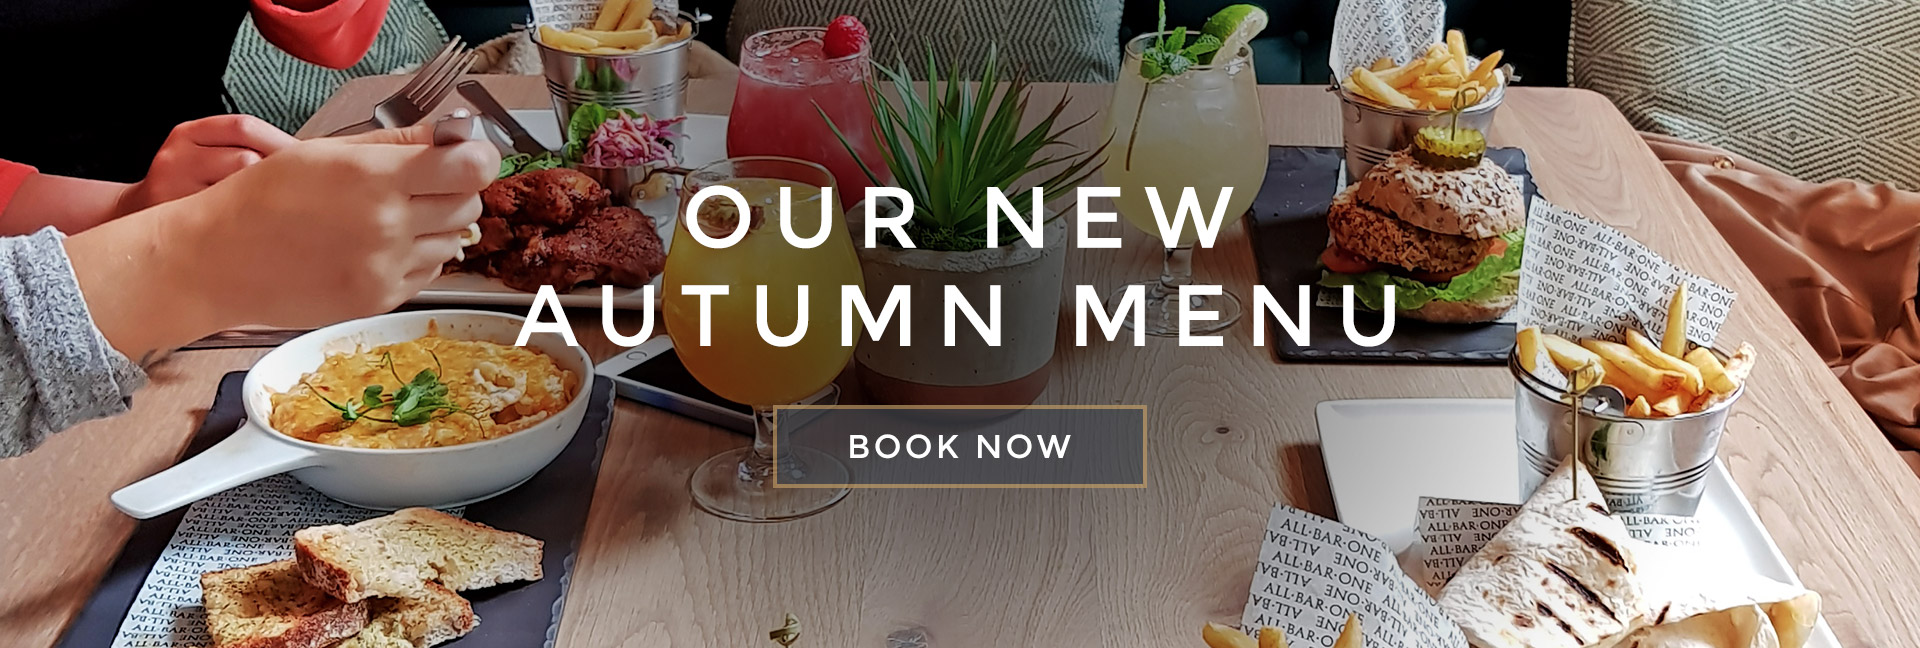 Our new Autumn menu at All Bar One Liverpool - Book now